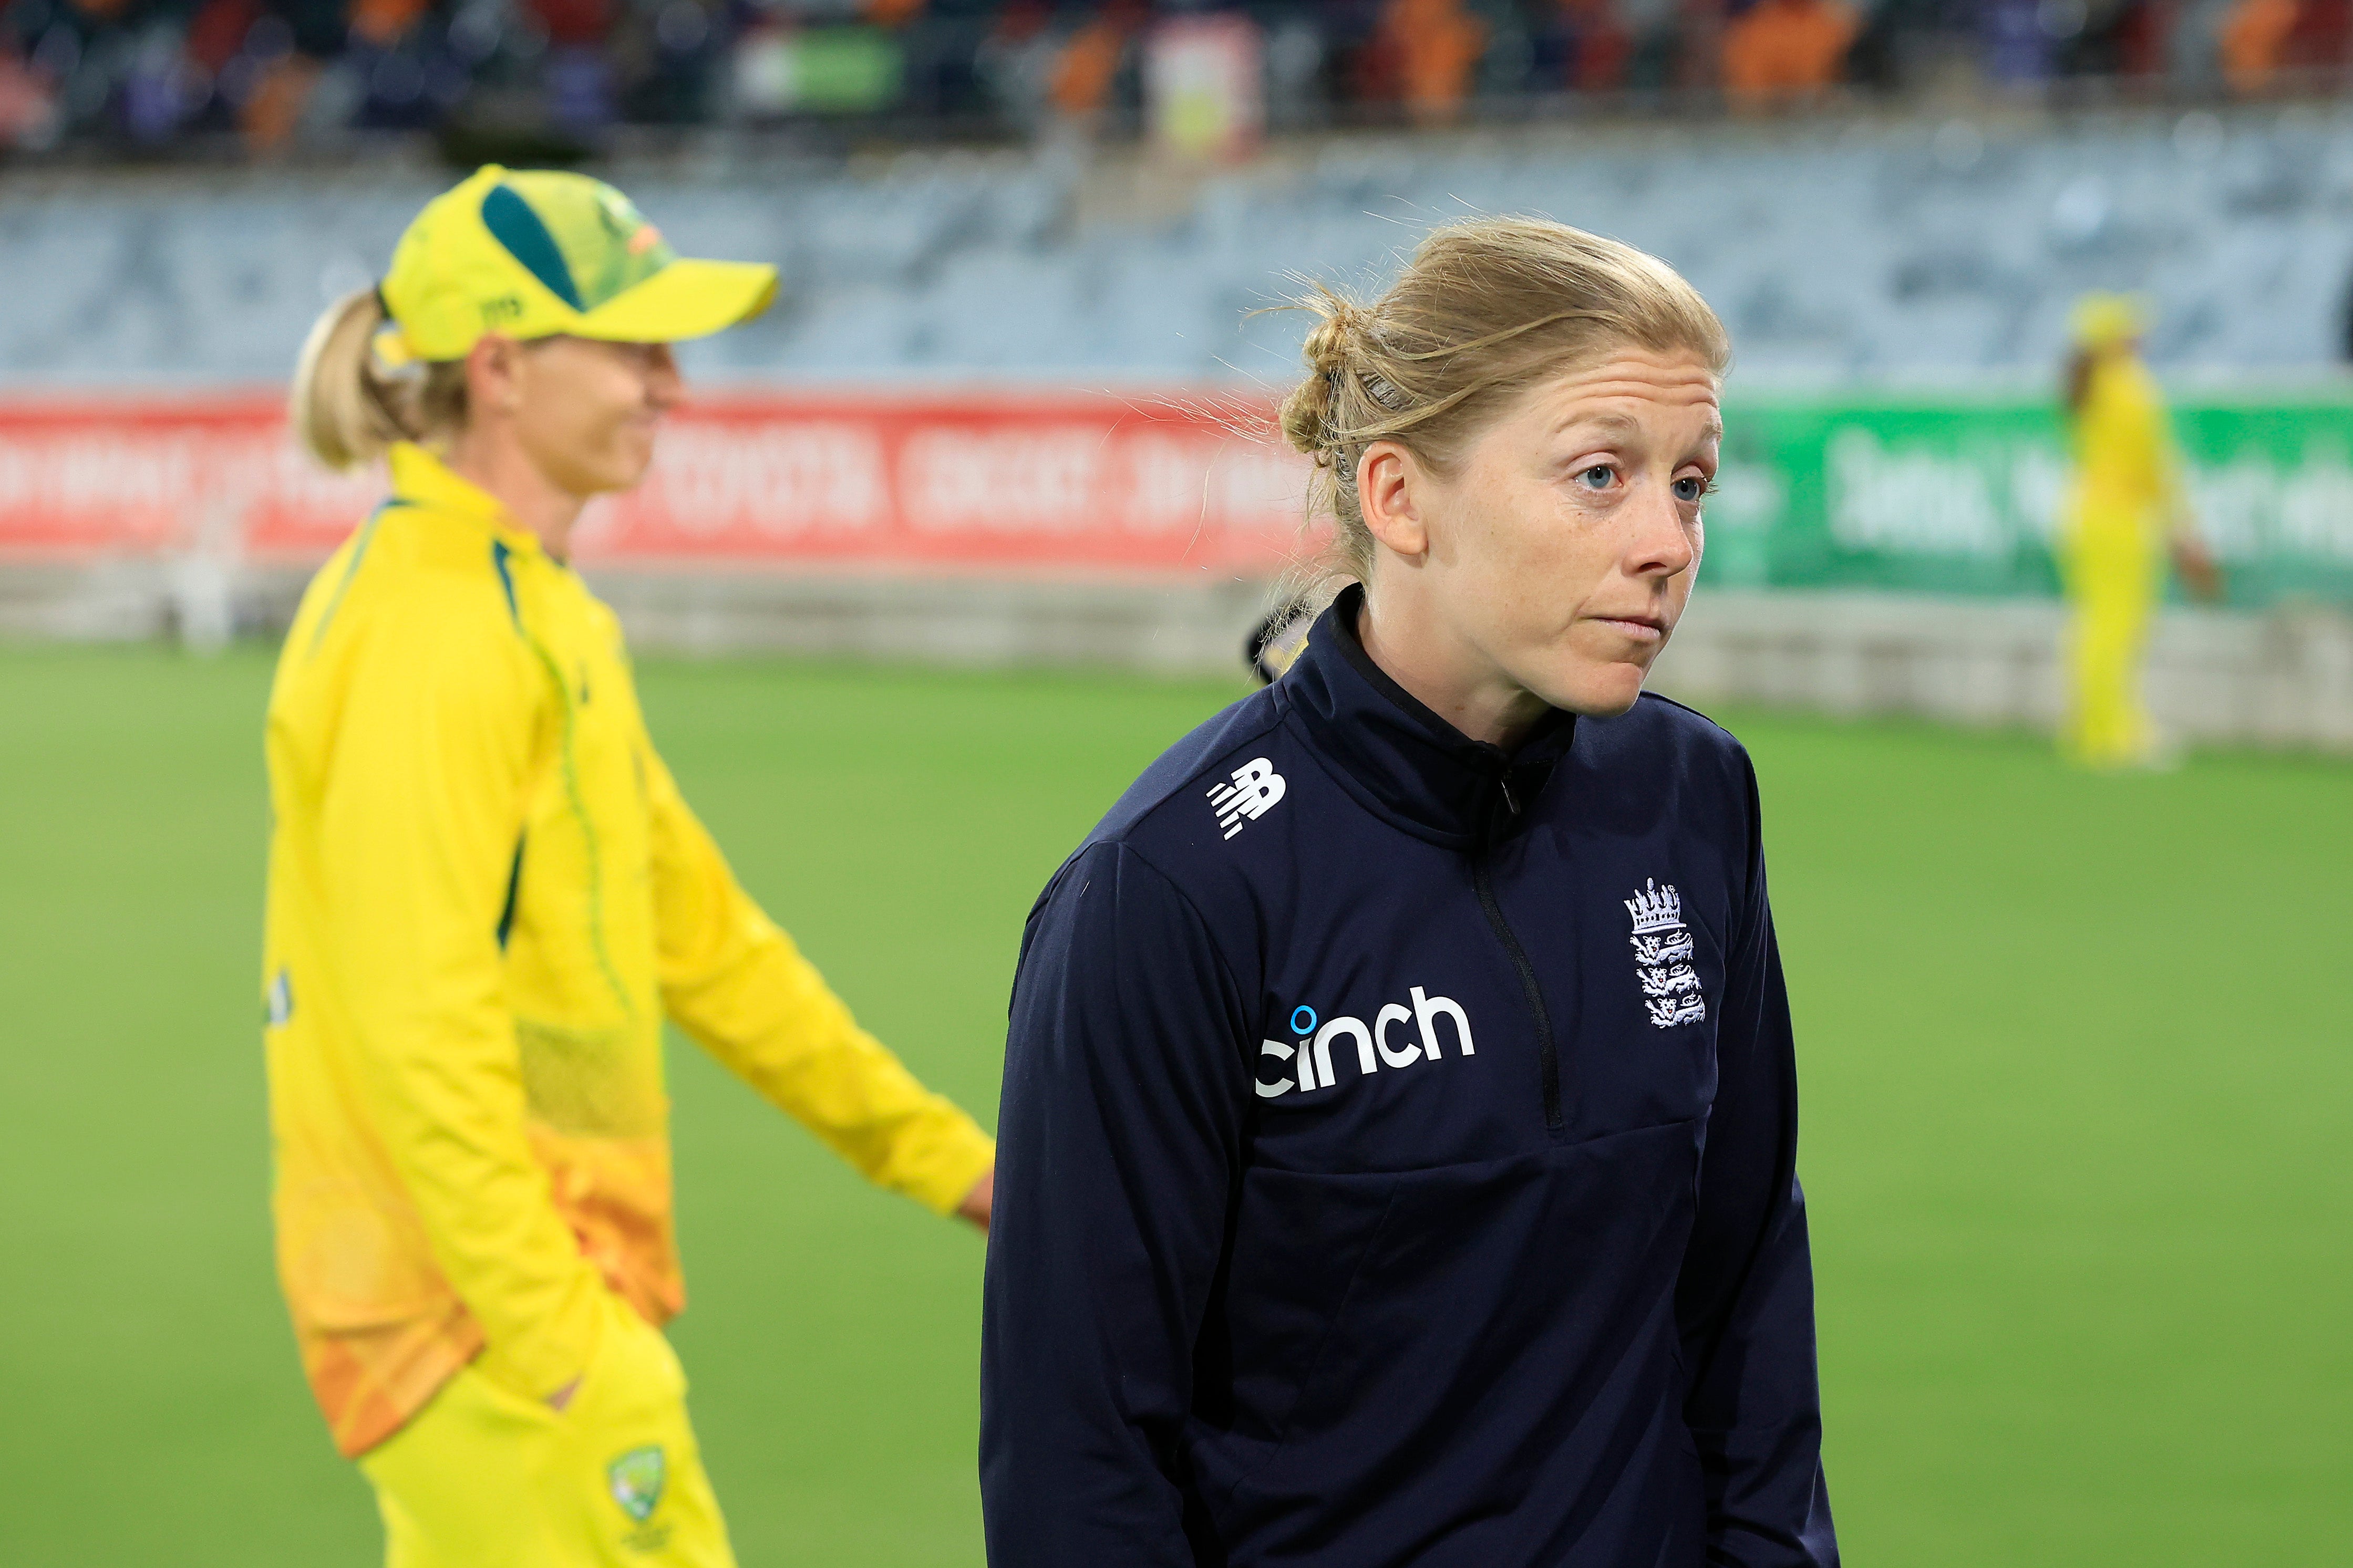 Heather Knight talks to the media after defeat to Australia